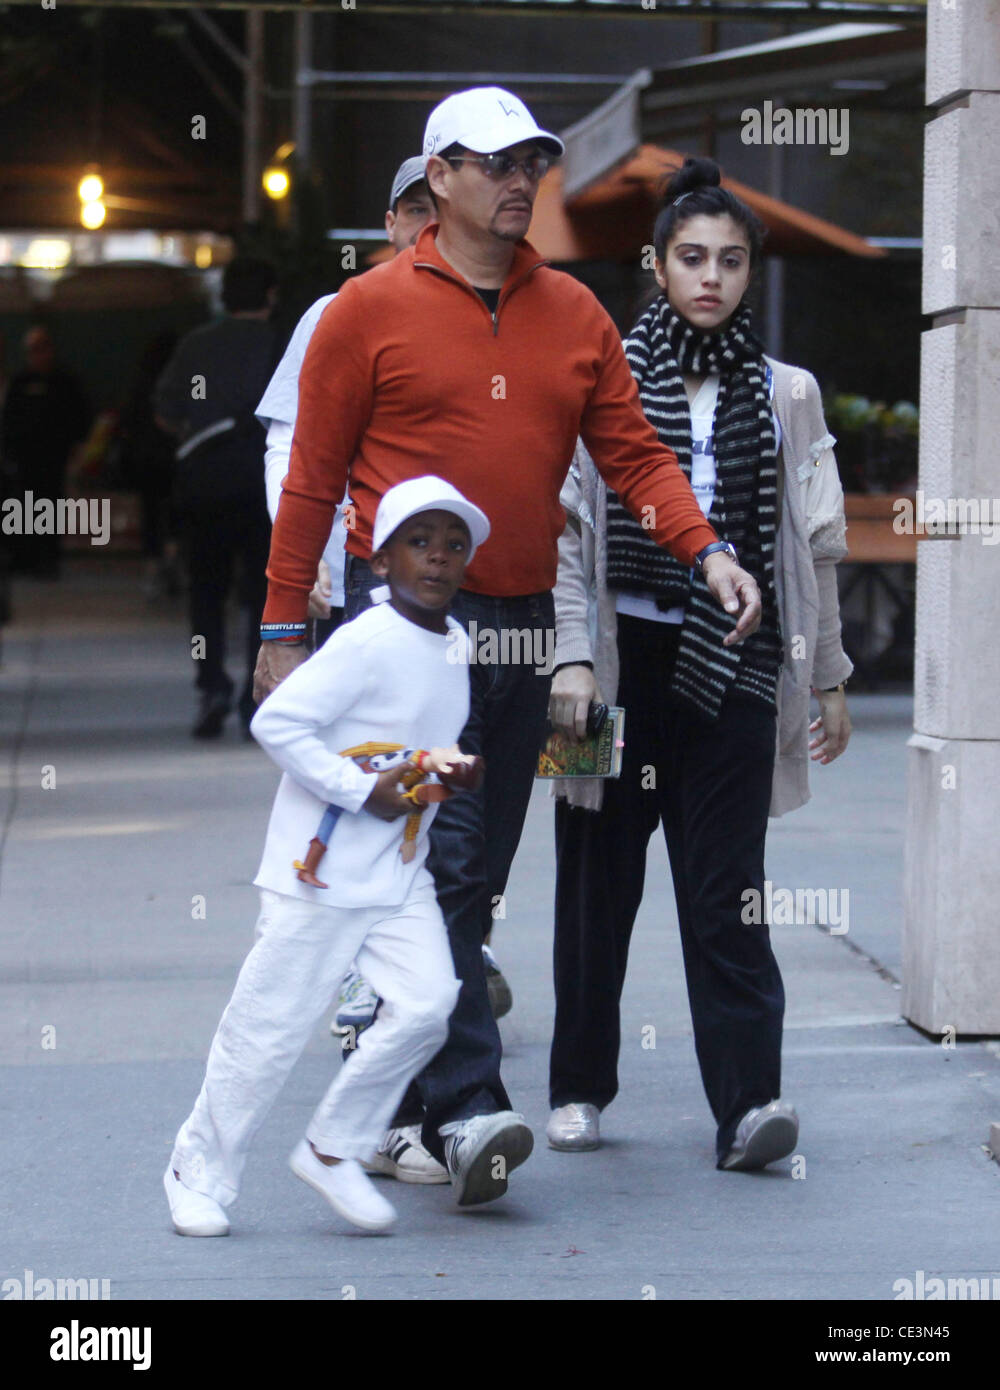 David and Lourdes Leon Madonna and her family are seen arriving at the Kabbalah Center in NYC. New York City, USA  - 13.11.10 Stock Photo